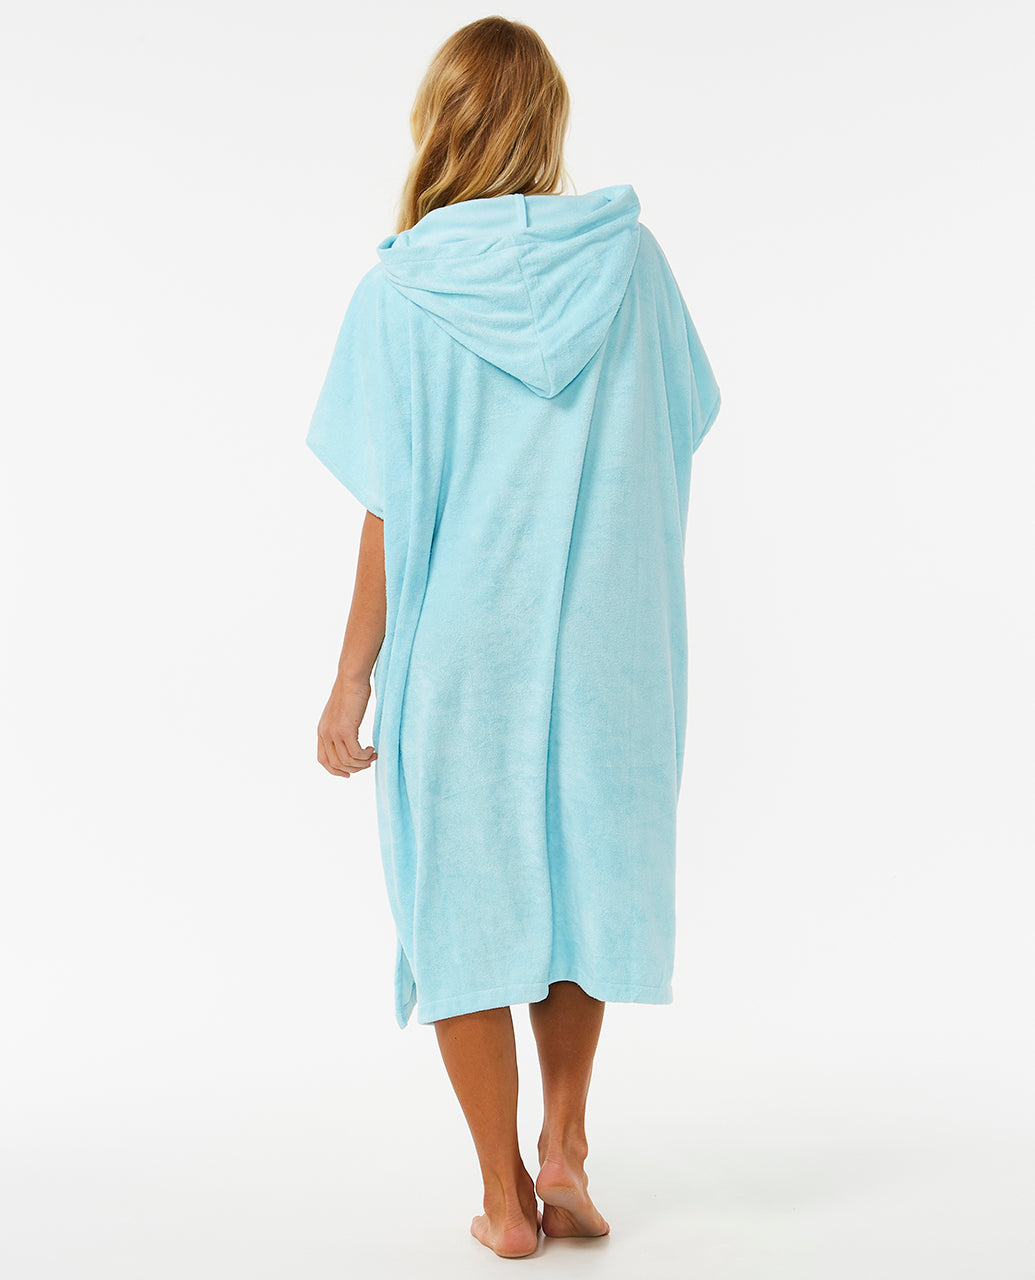 CLASSIC SURF HOODED TOWEL